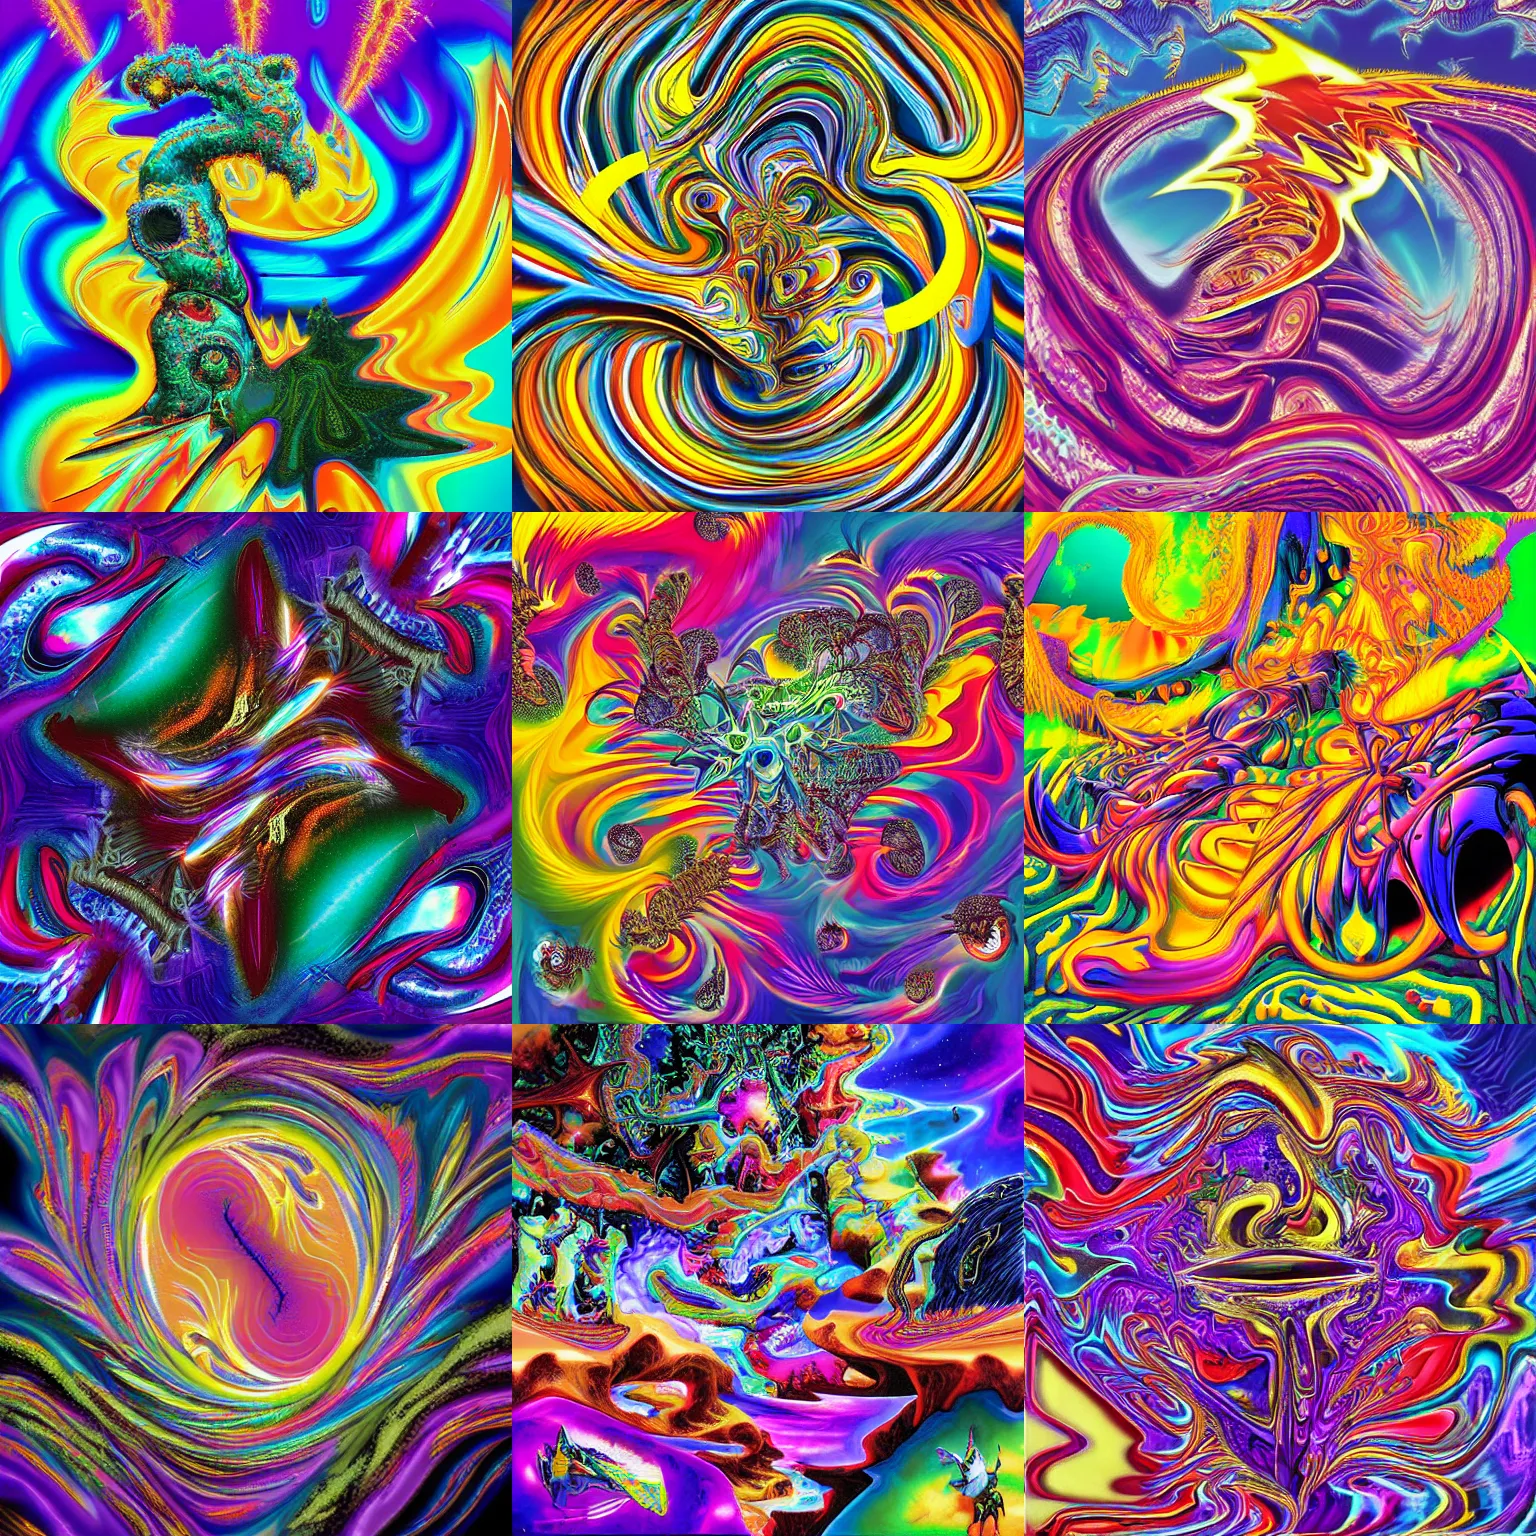 Prompt: surreal, hopalong fractal, detailed professional, high quality portrait sonic airbrush art tame impala album cover portrait of a liquid dissolving LSD DMT sonic the hedgehog surfing through cyberspace, purple checkerboard background, 1990s 1992 Sega Genesis video game album cover